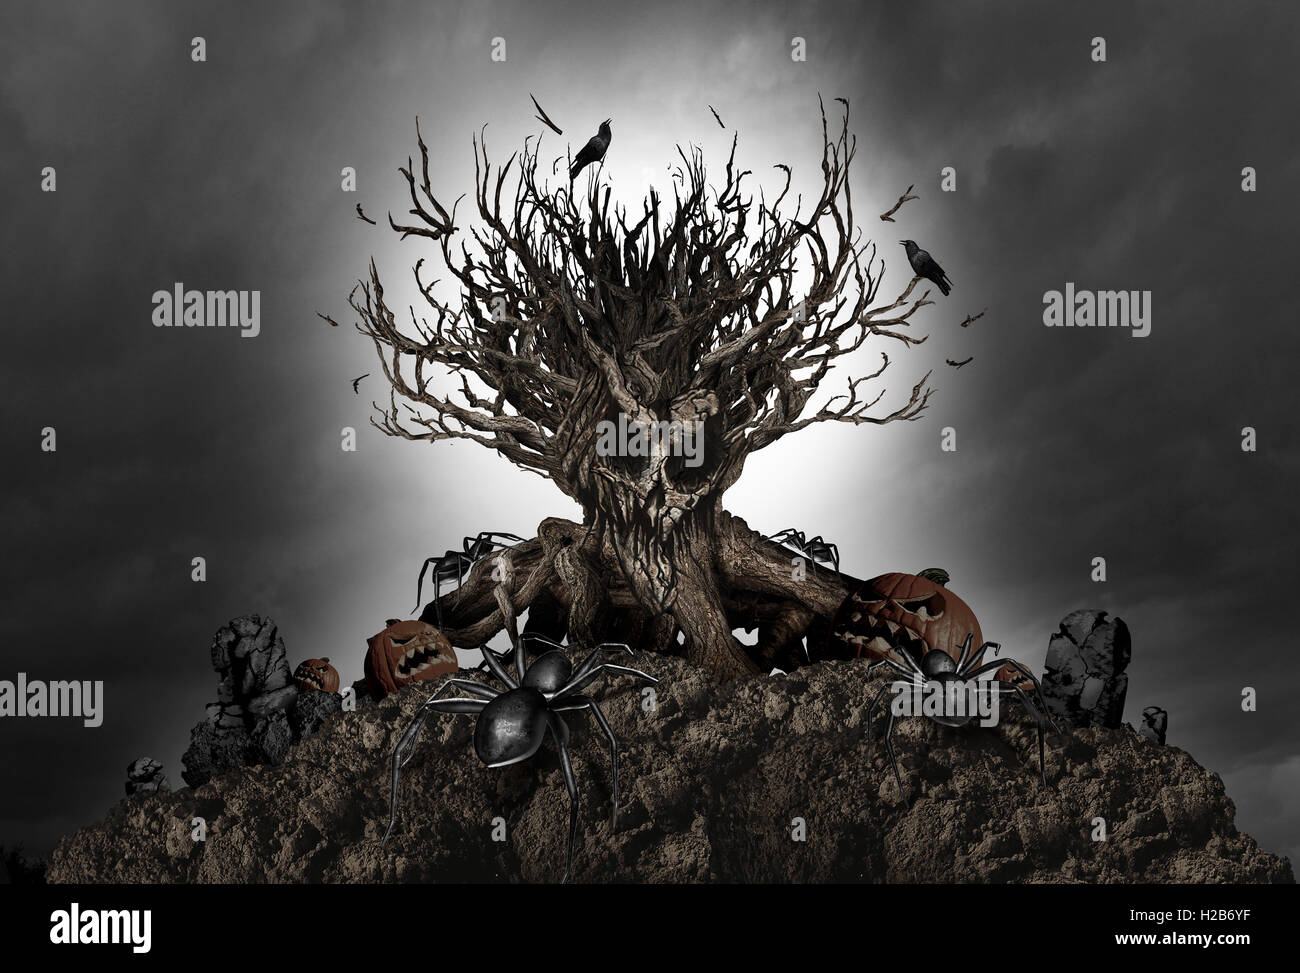 Halloween haunted creepy tree night background as an old growth plant shaped as a monster skull with pumpkins and spiders as a scary autumn scenery as a horror theme with 3D illustration elements. Stock Photo